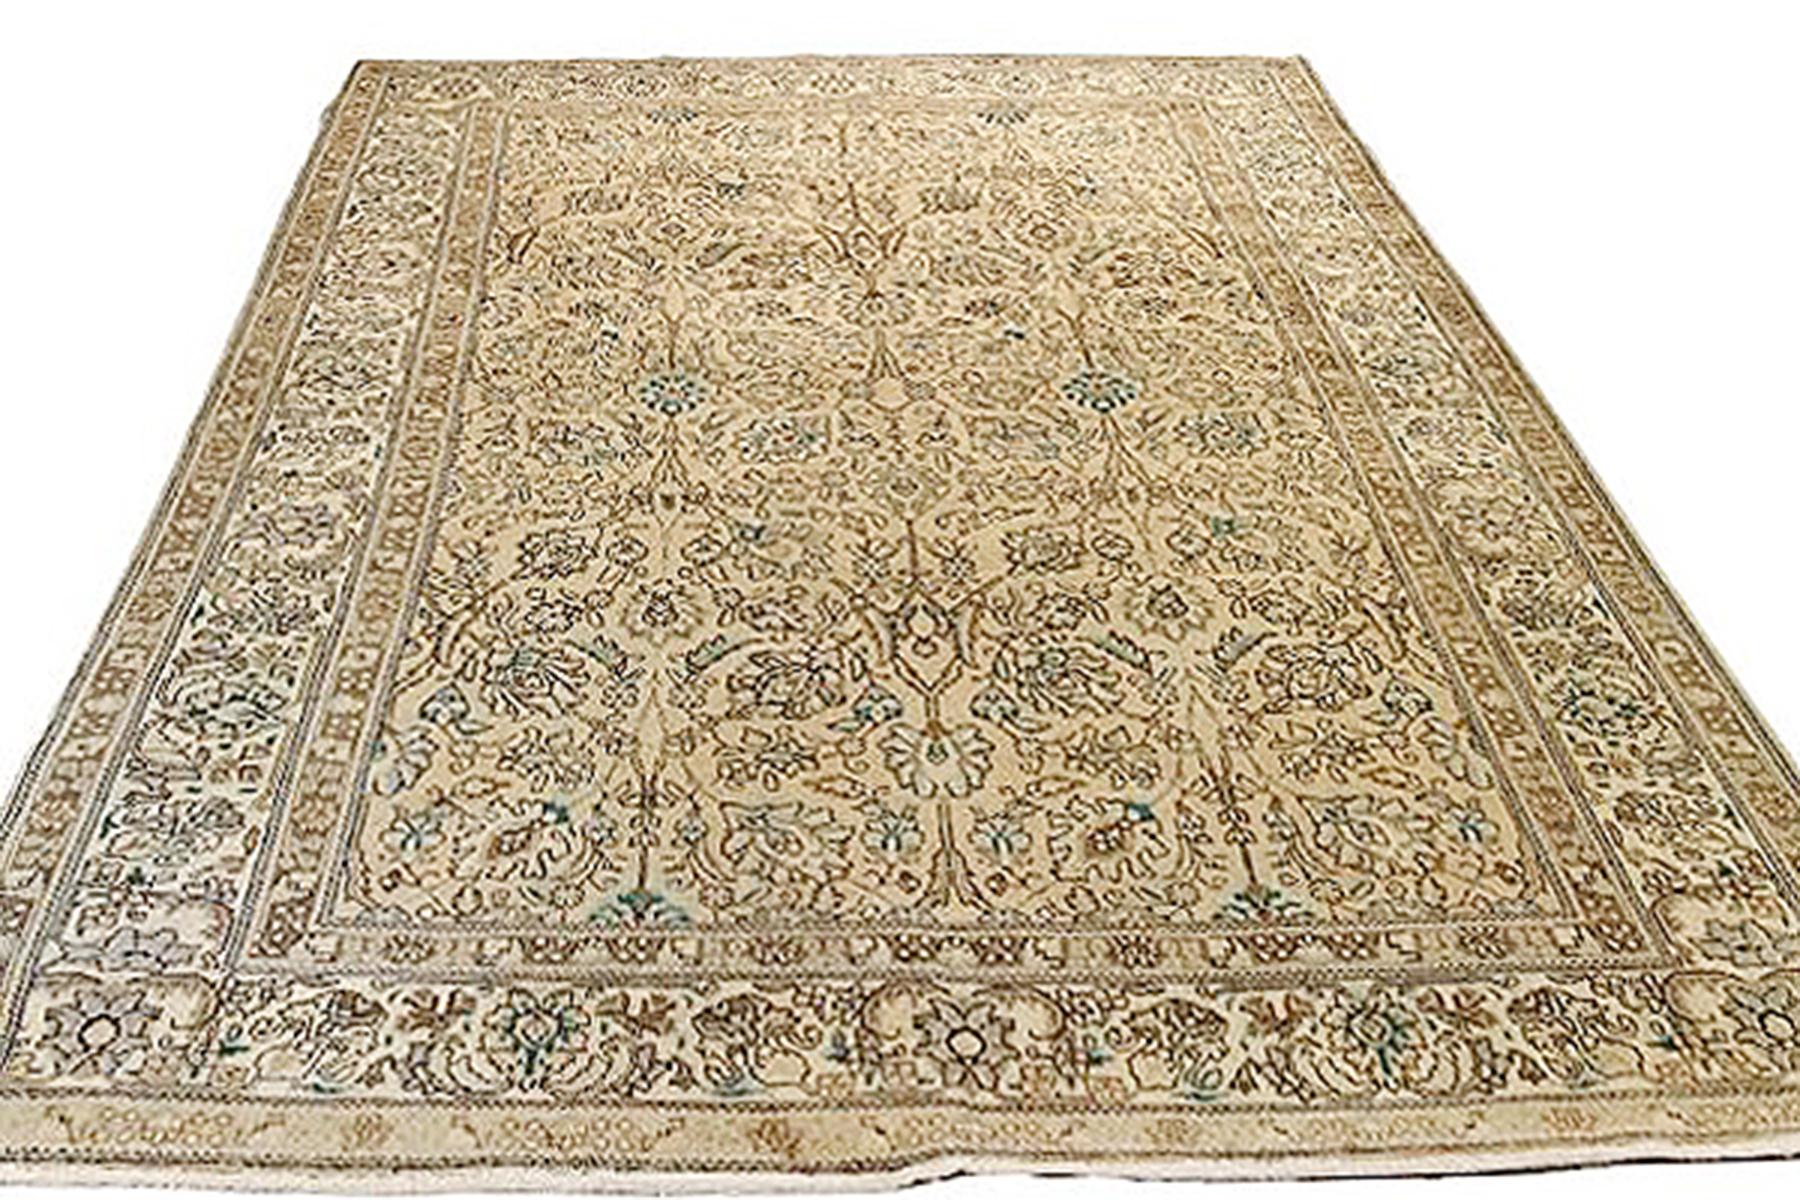 Antique Persian rug handwoven from the finest sheep’s wool and colored with all-natural vegetable dyes that are safe for humans and pets. It’s a traditional Tabriz weaving featuring a lovely ensemble of floral designs in black and green over a beige